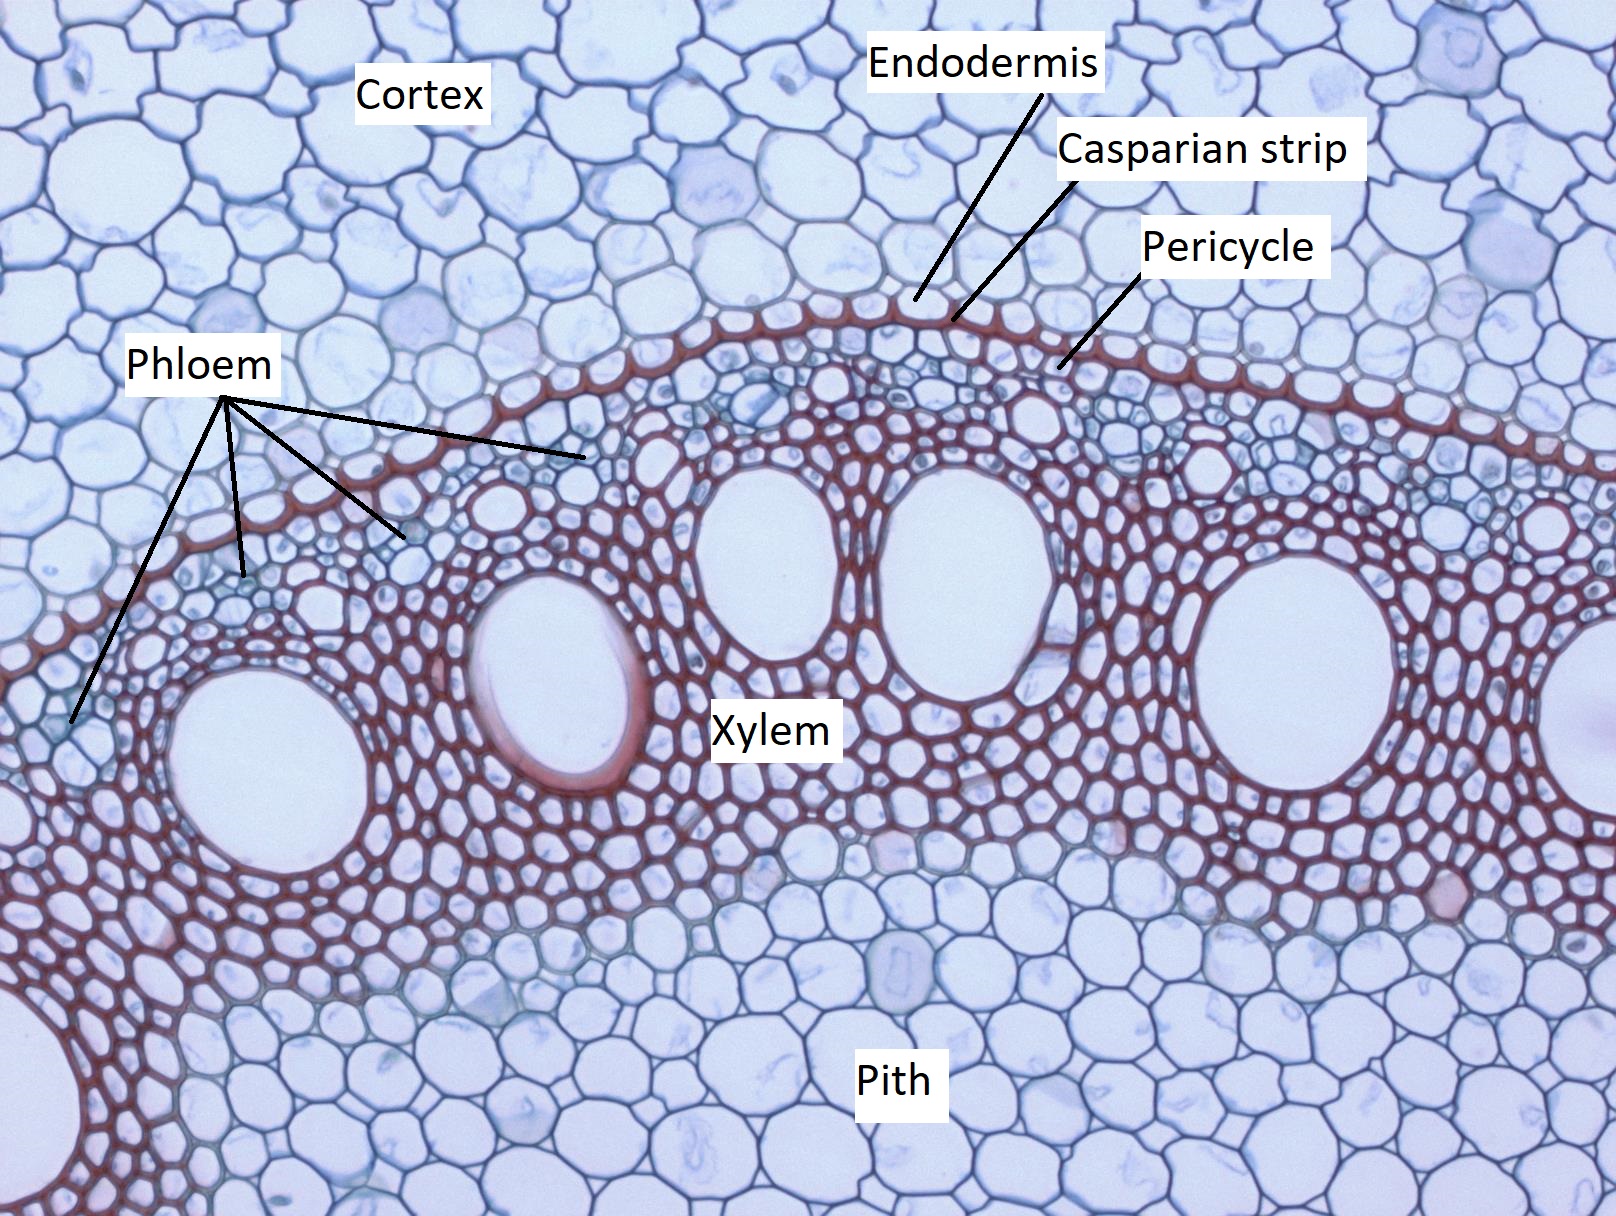 Zea mays root vascular cylinder cross section